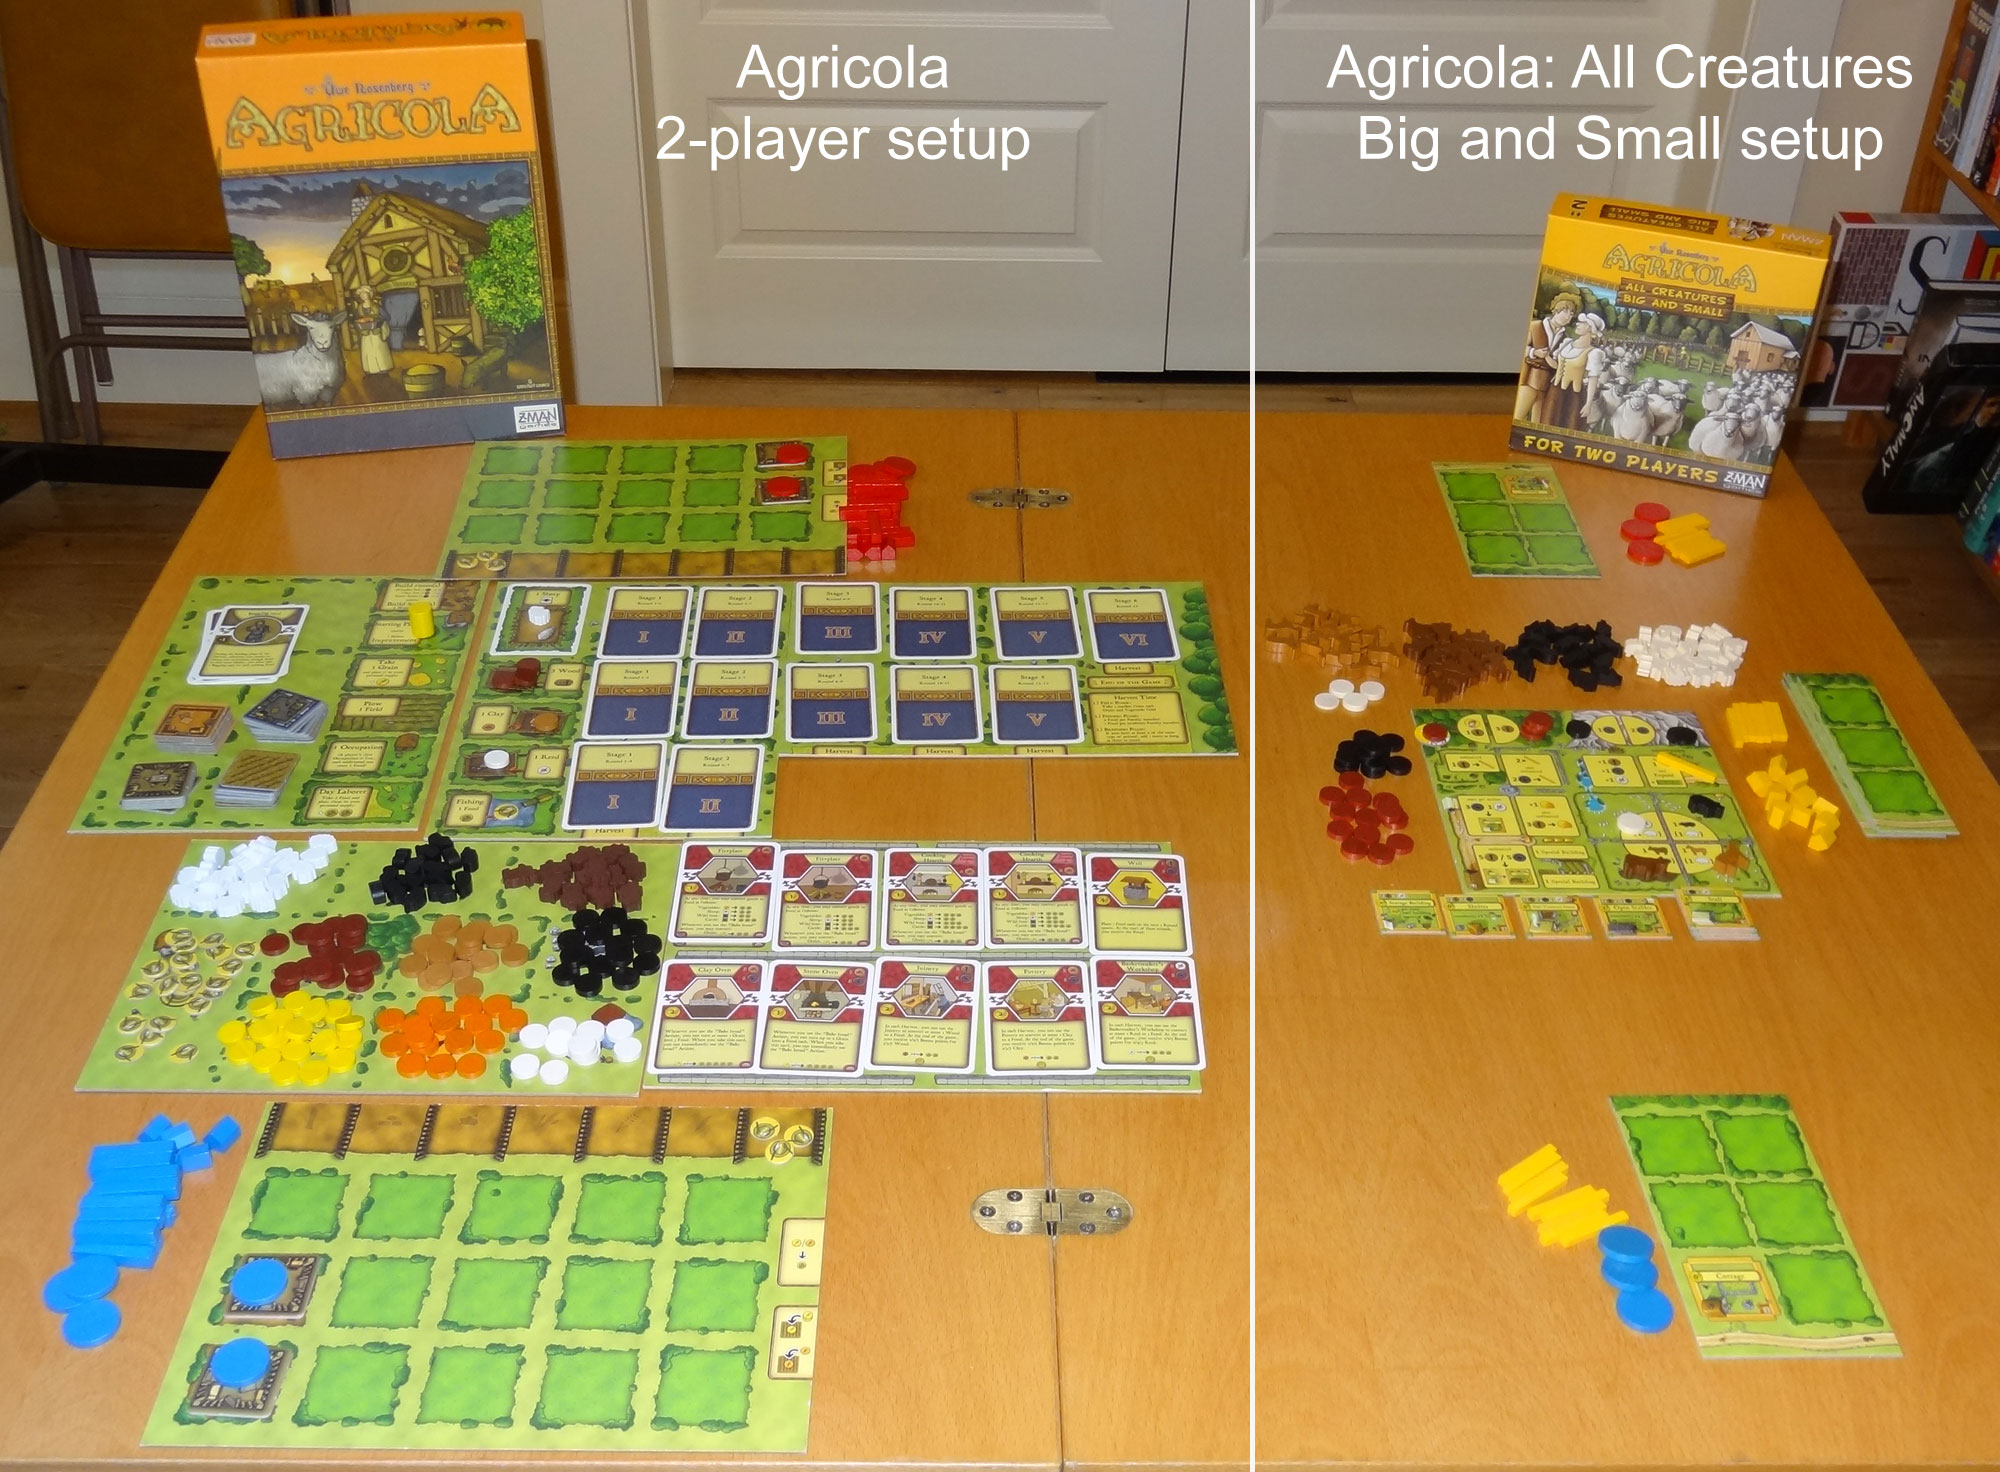 2000x1472 > Agricola Wallpapers